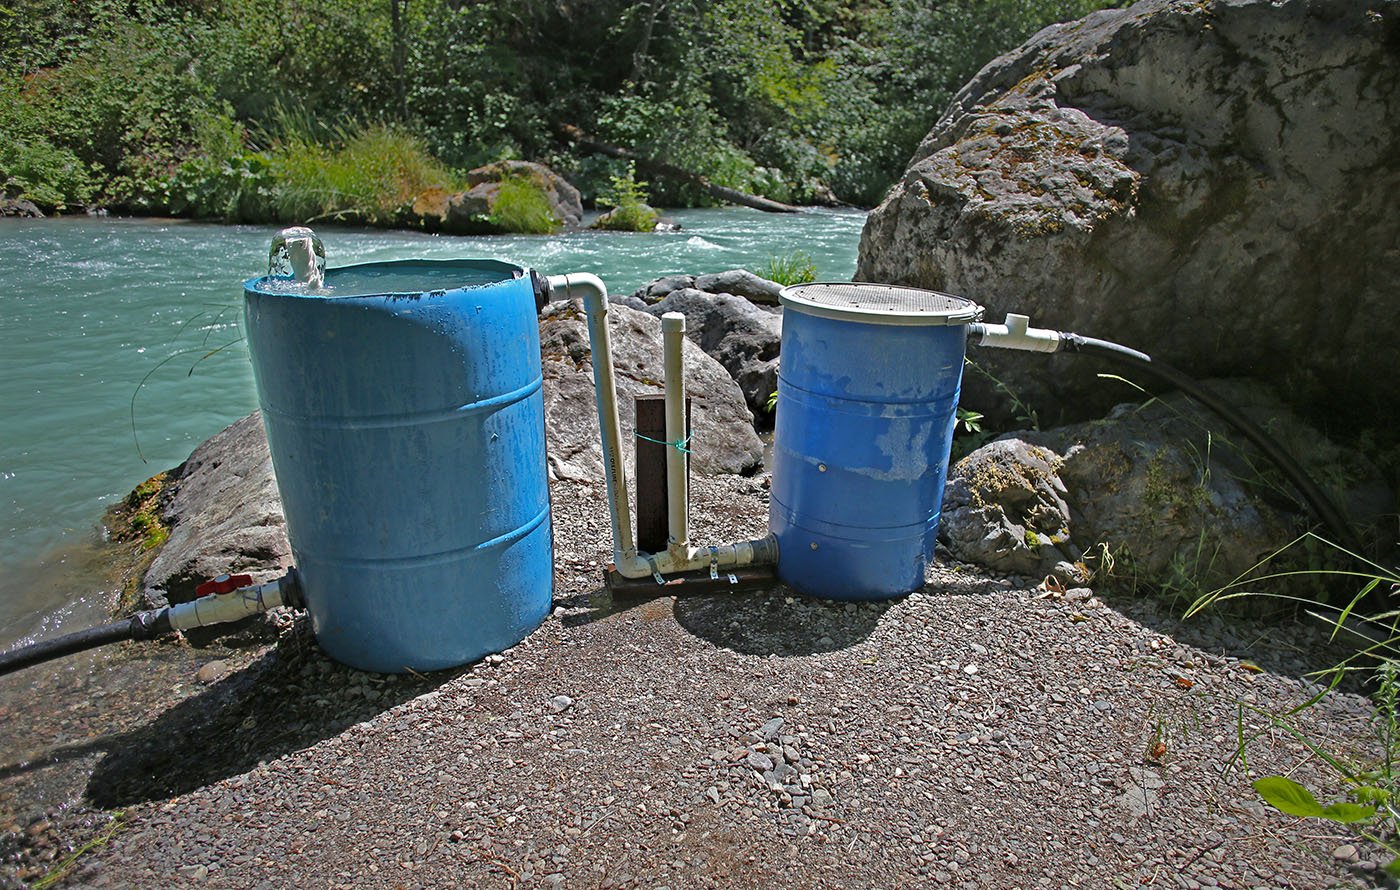  Shasta-Trinity National Forest — From about 200 feet away, a tube carries the river’s cold water runs into one of the blue barrels where the sediment can settle out. The clarified water then flows into the second barrel. Once the eggs hatch, the bab